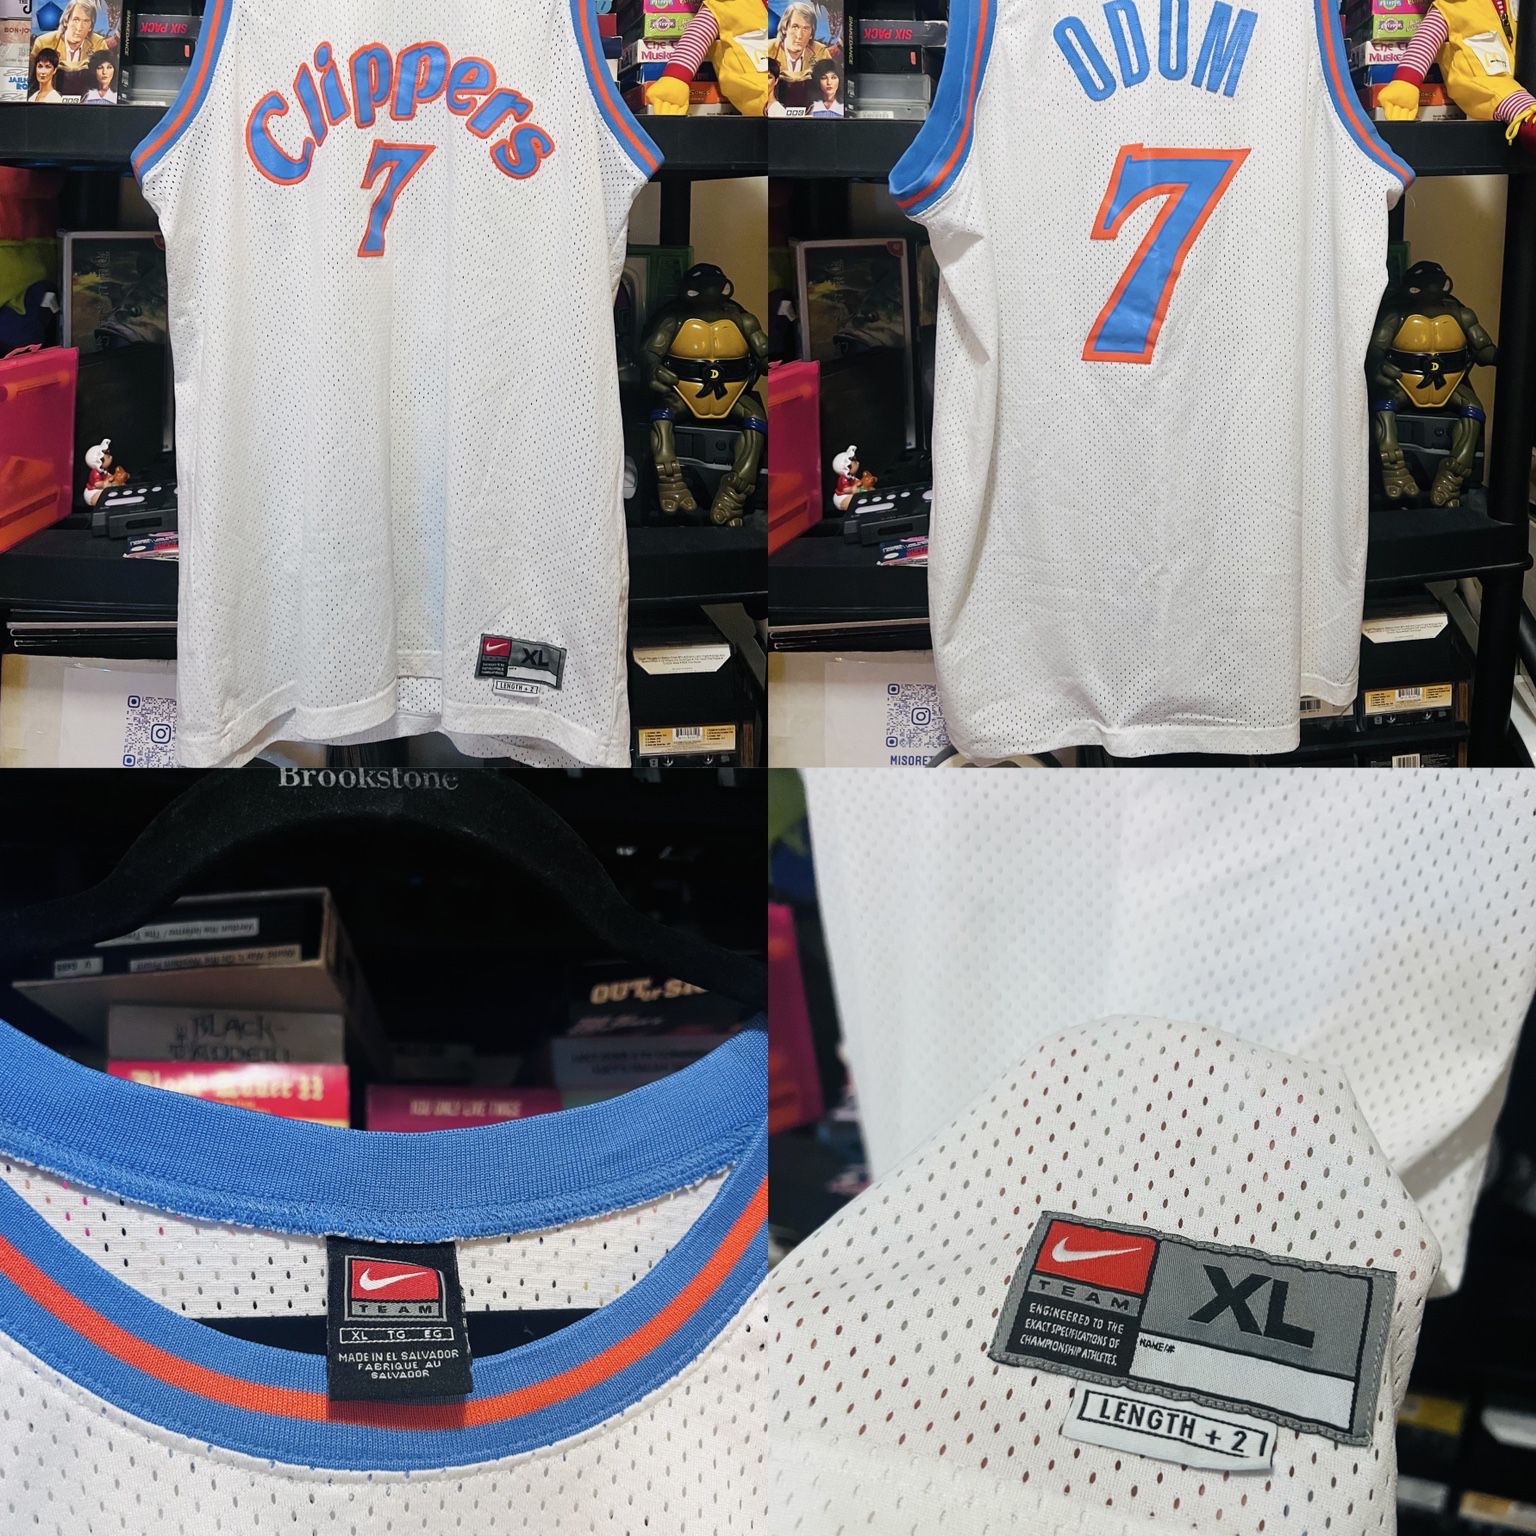 Los Angeles Clippers Lamar Odom Authentic Reebok Alternate Jersey Size 48  XL for Sale in San Dimas, CA - OfferUp